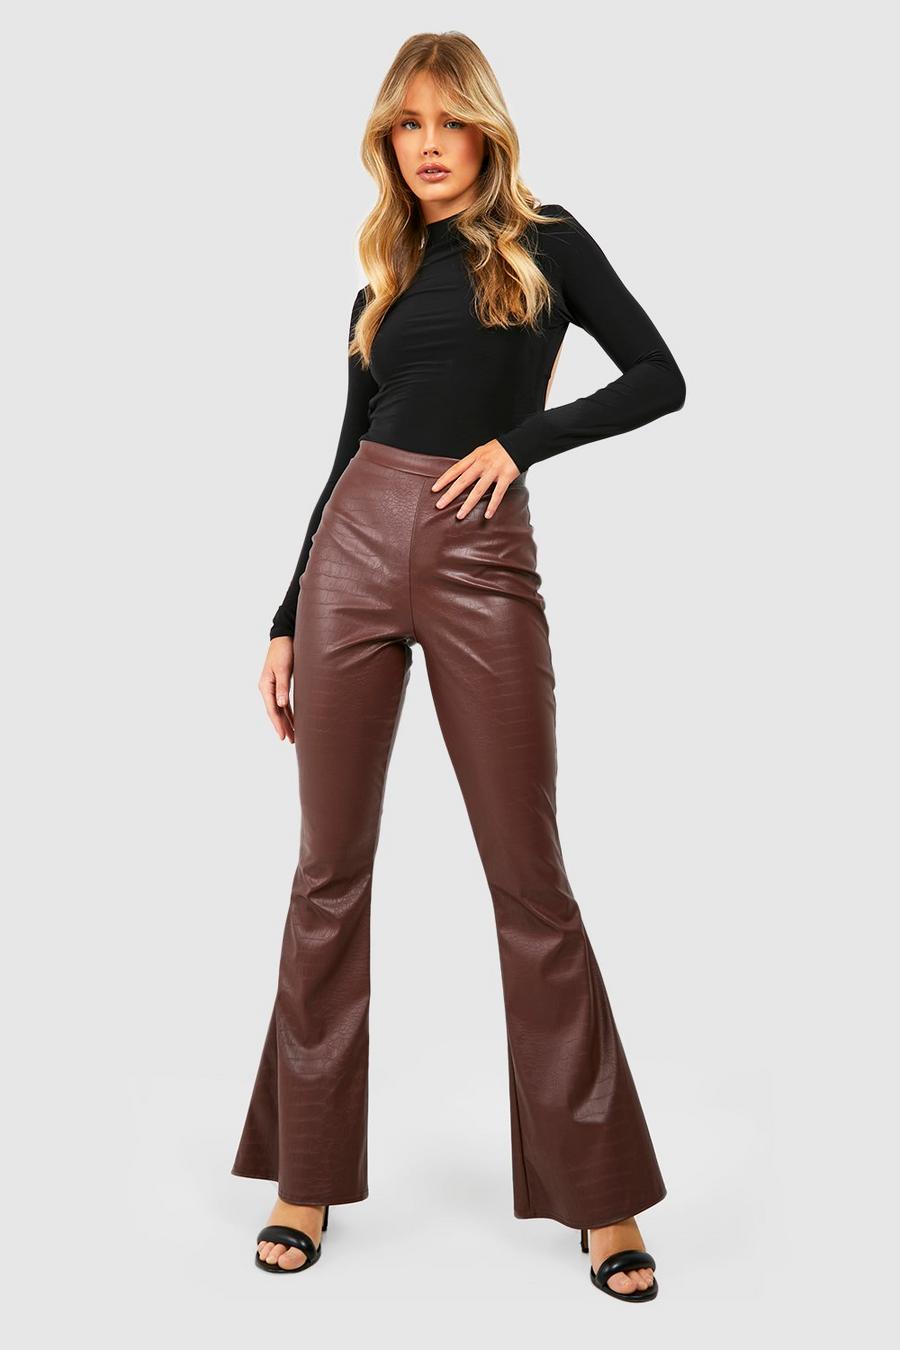 Chocolate Croc Faux Leather High Waisted Flared Pants